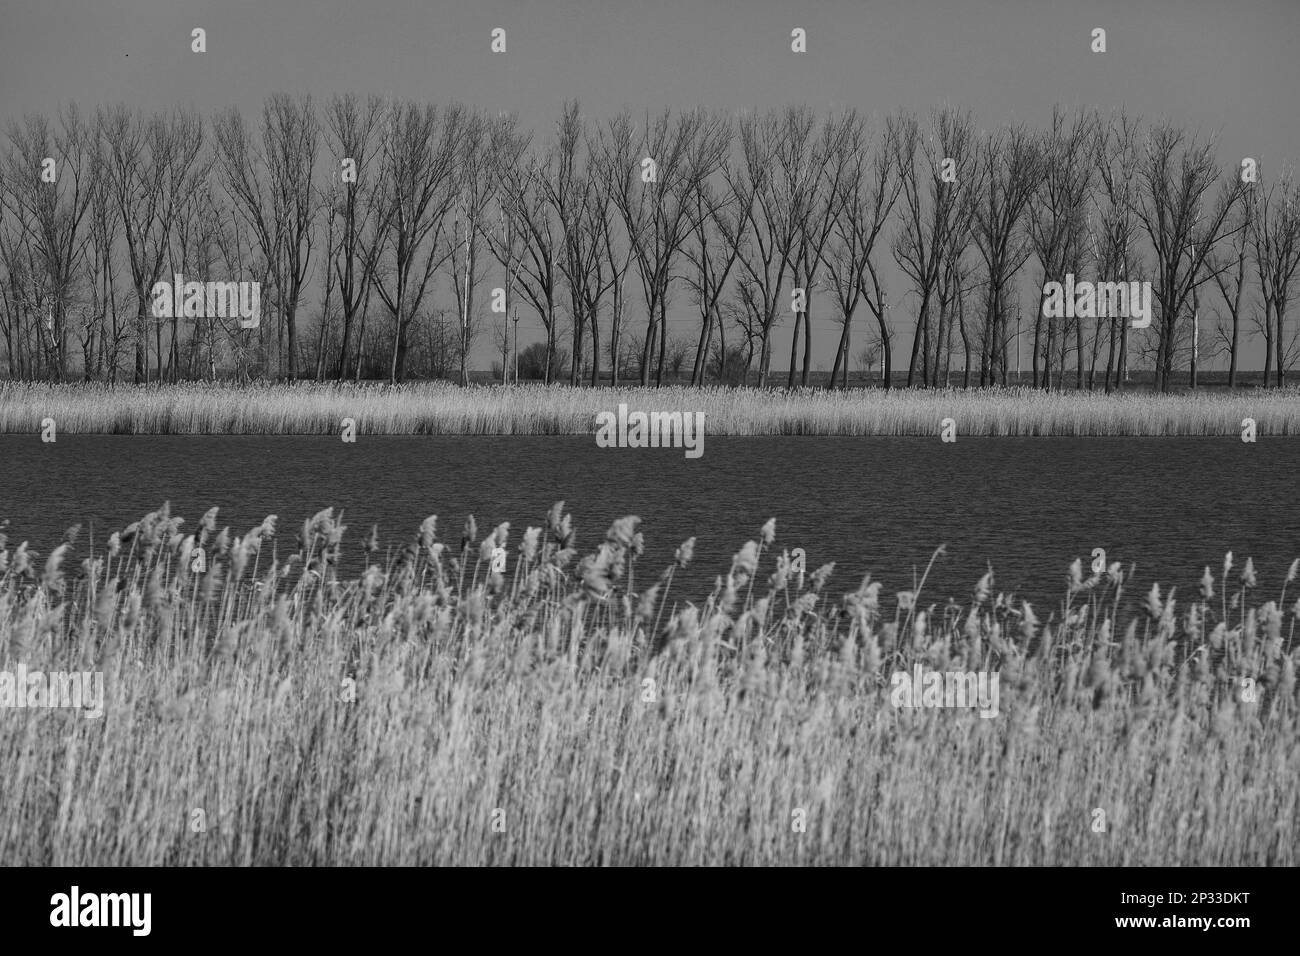 Black and white early spring landscape with trees in the background, river in the middle and dry reeds in the foreground. Stock Photo